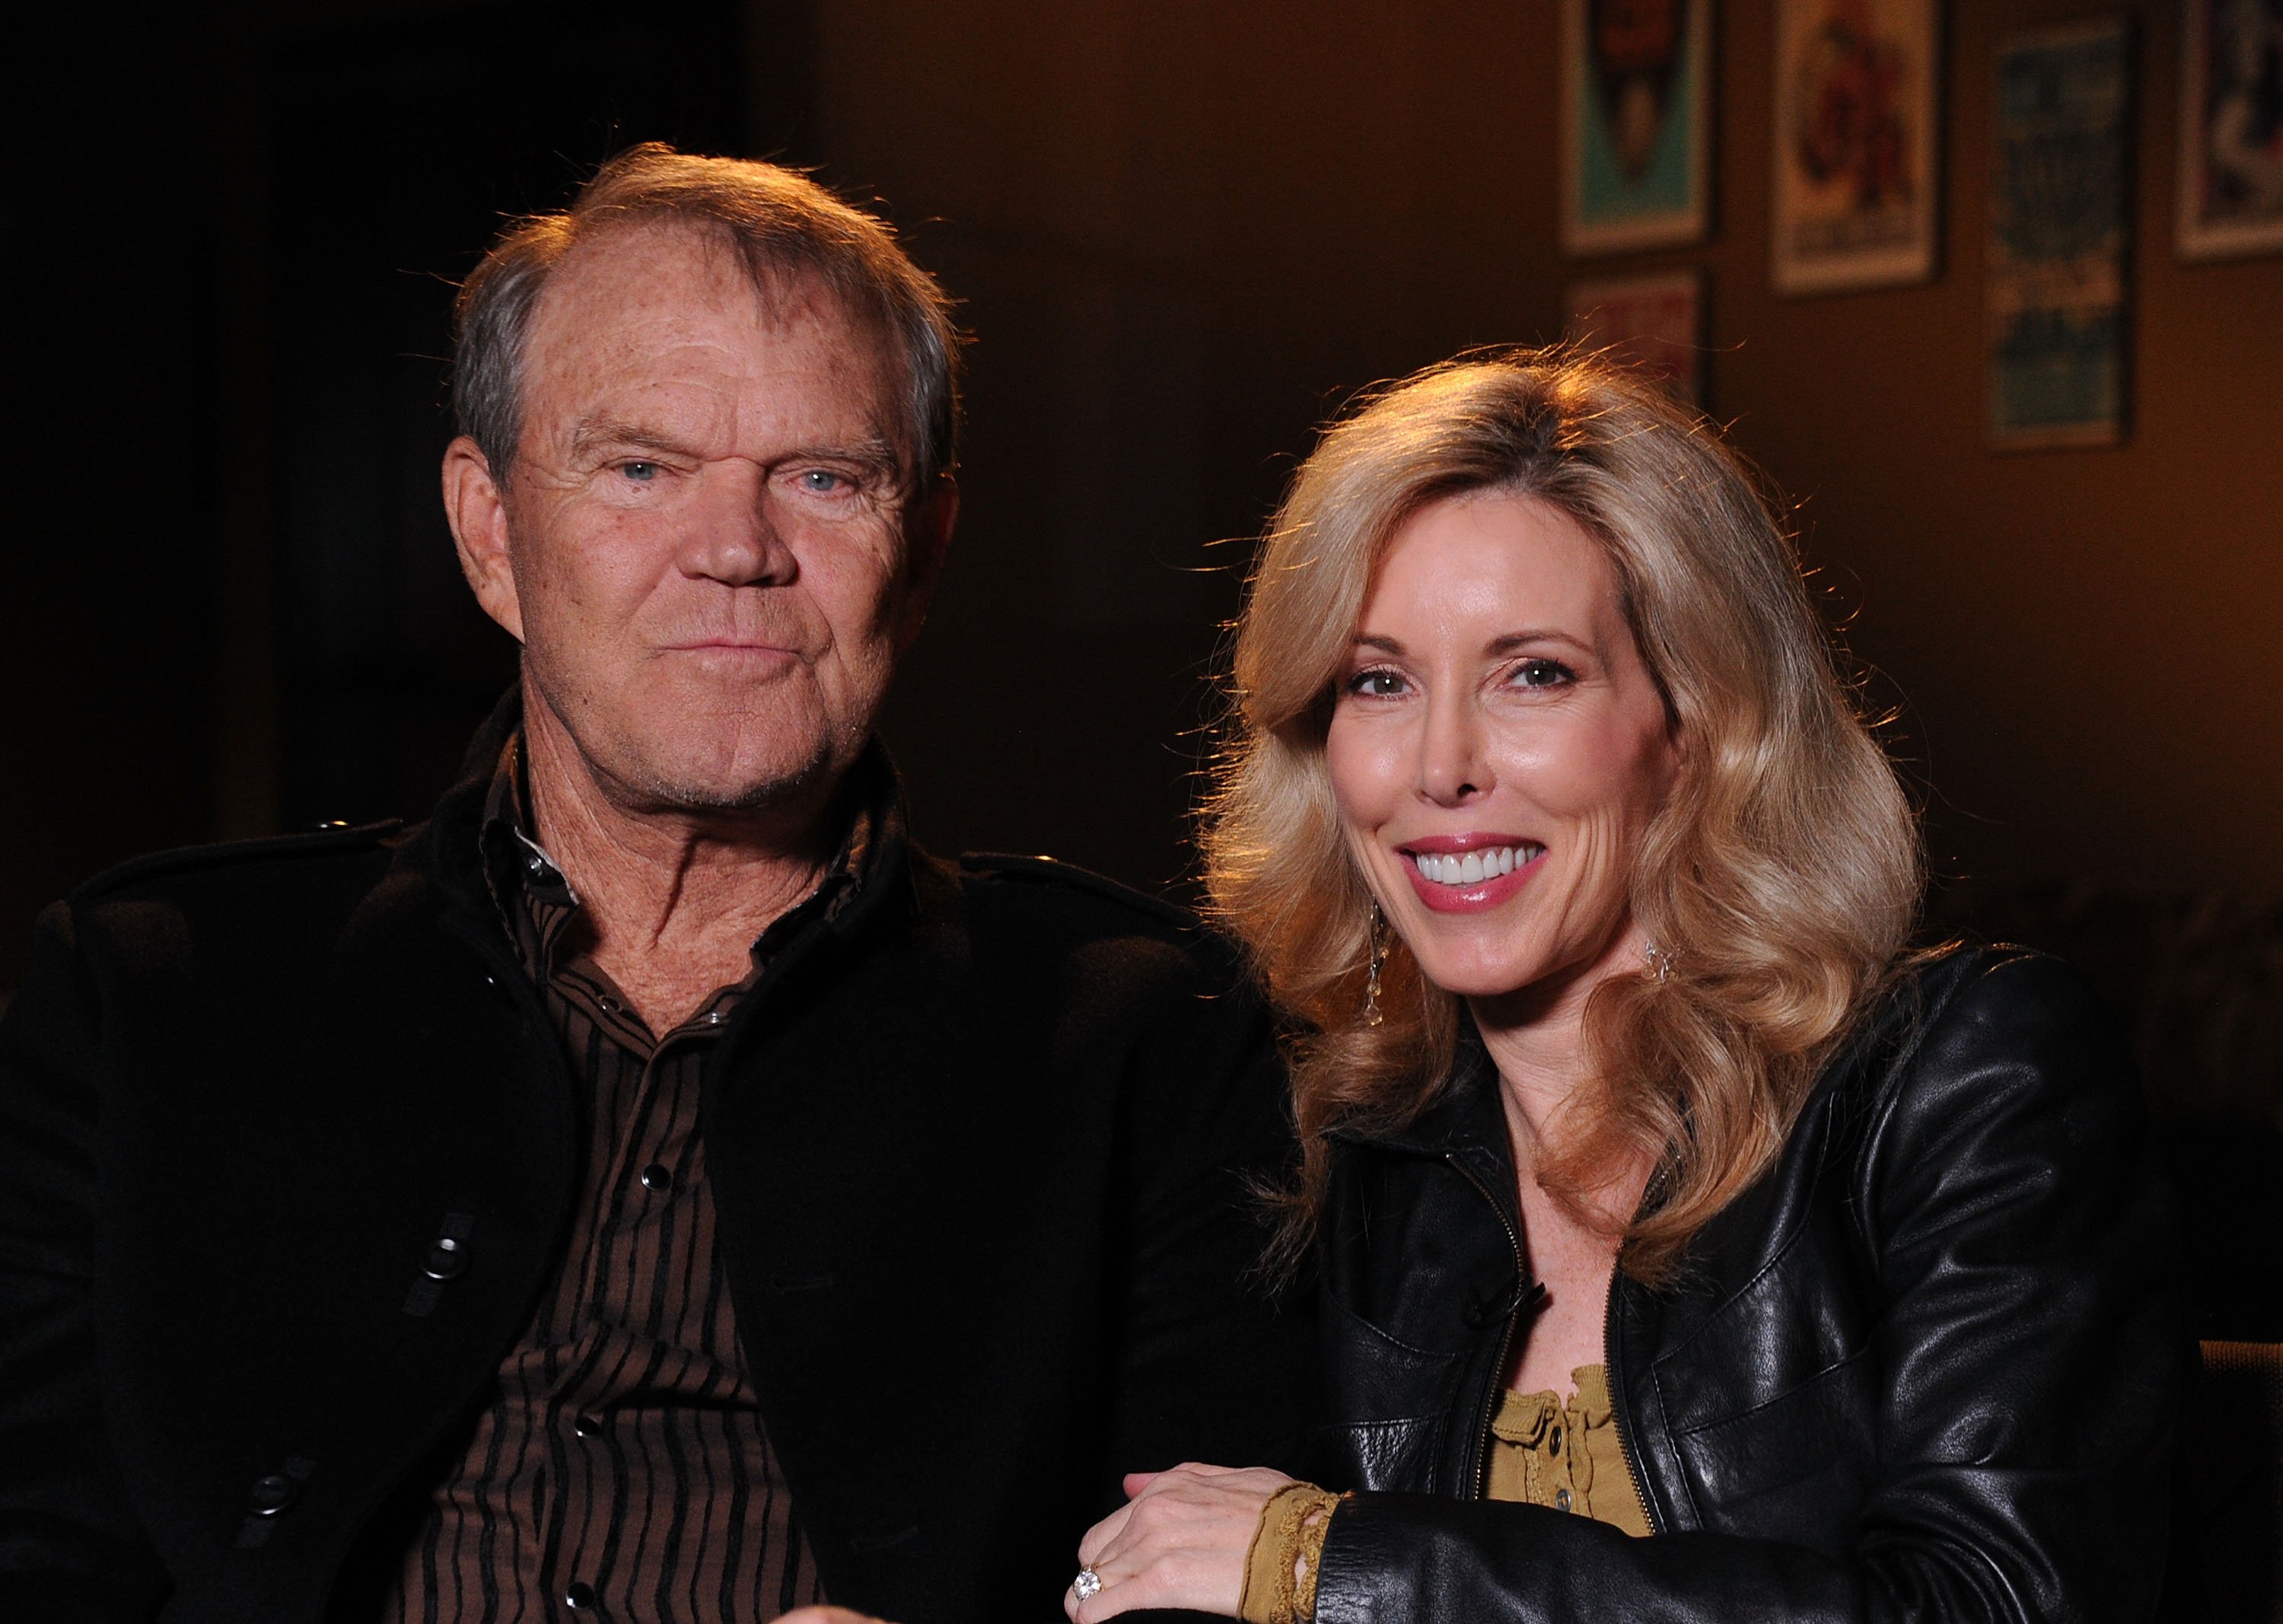 The late Glen Campbell and his wife Kim Campbell | Photo: Getty Images